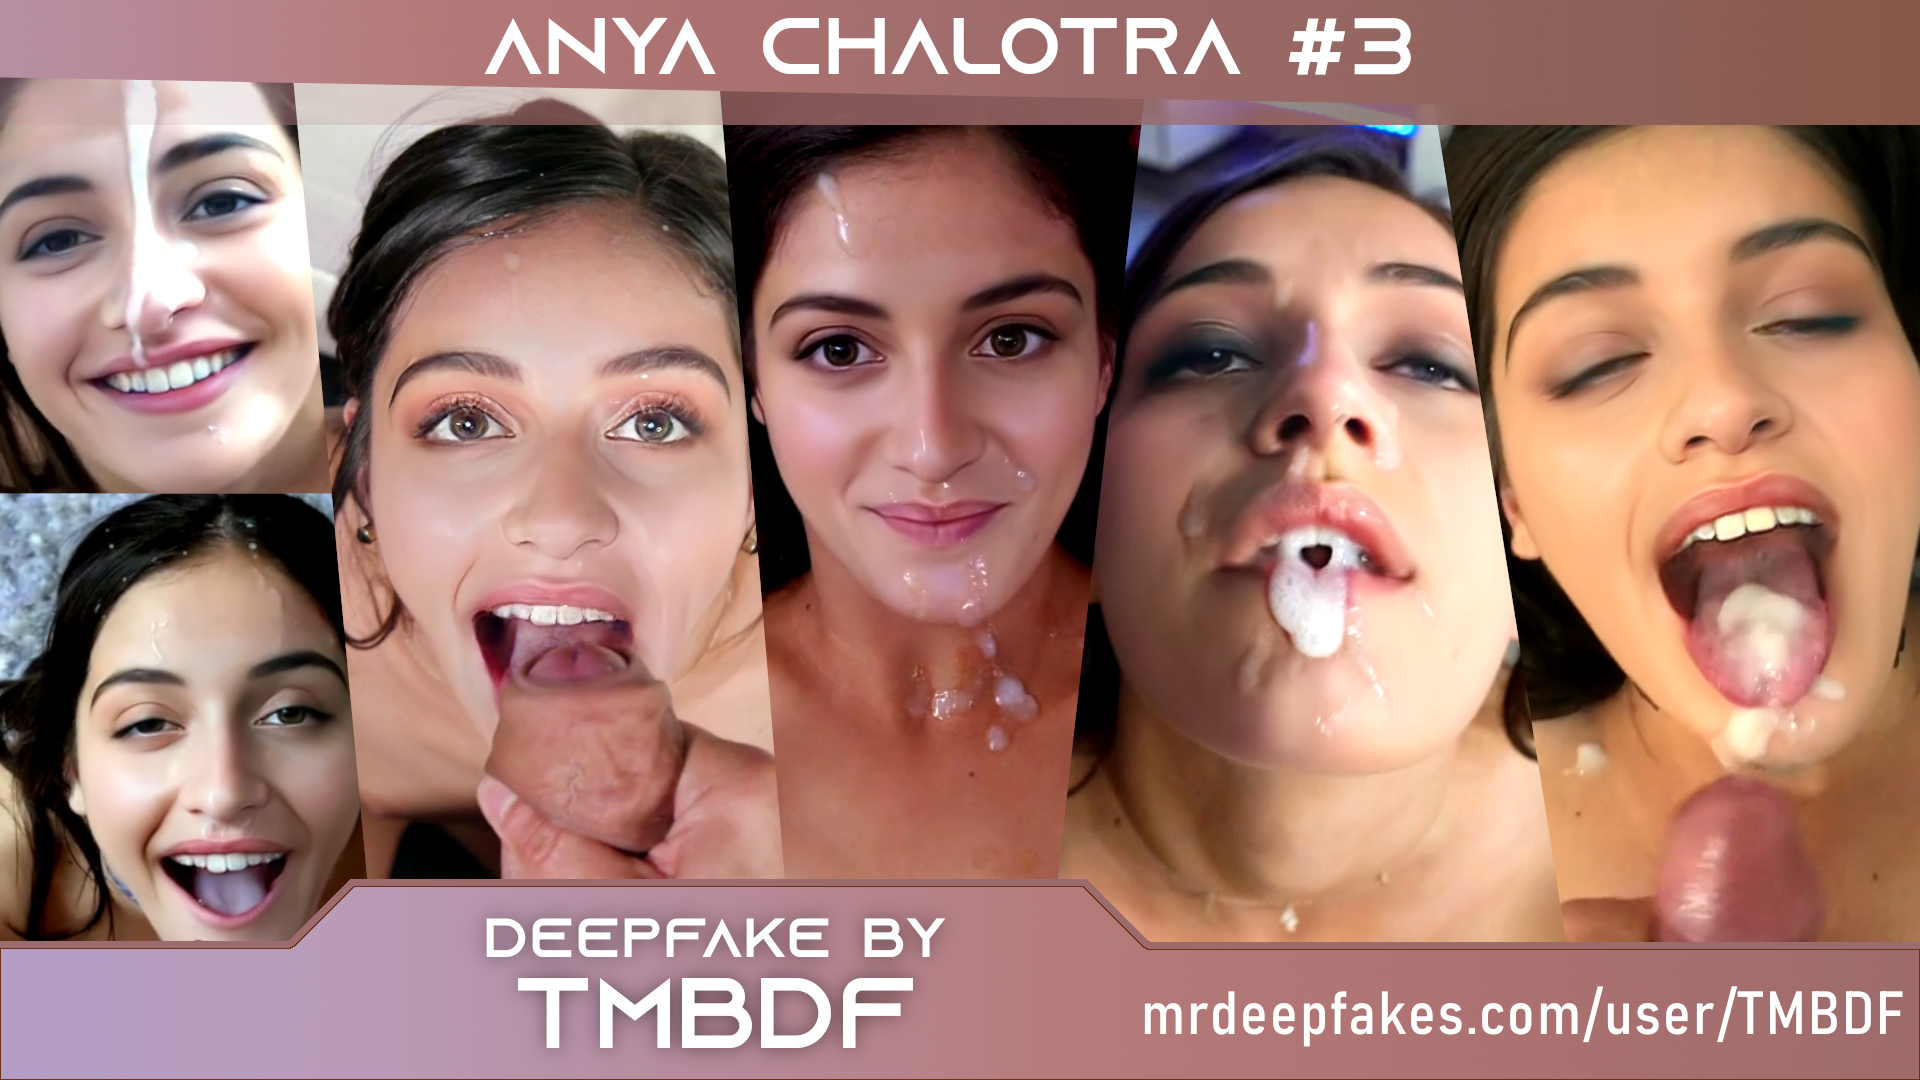 Not Anya Chalotra Cumshot Compilation (failled attempt) #3 (FREE)  - paid commission